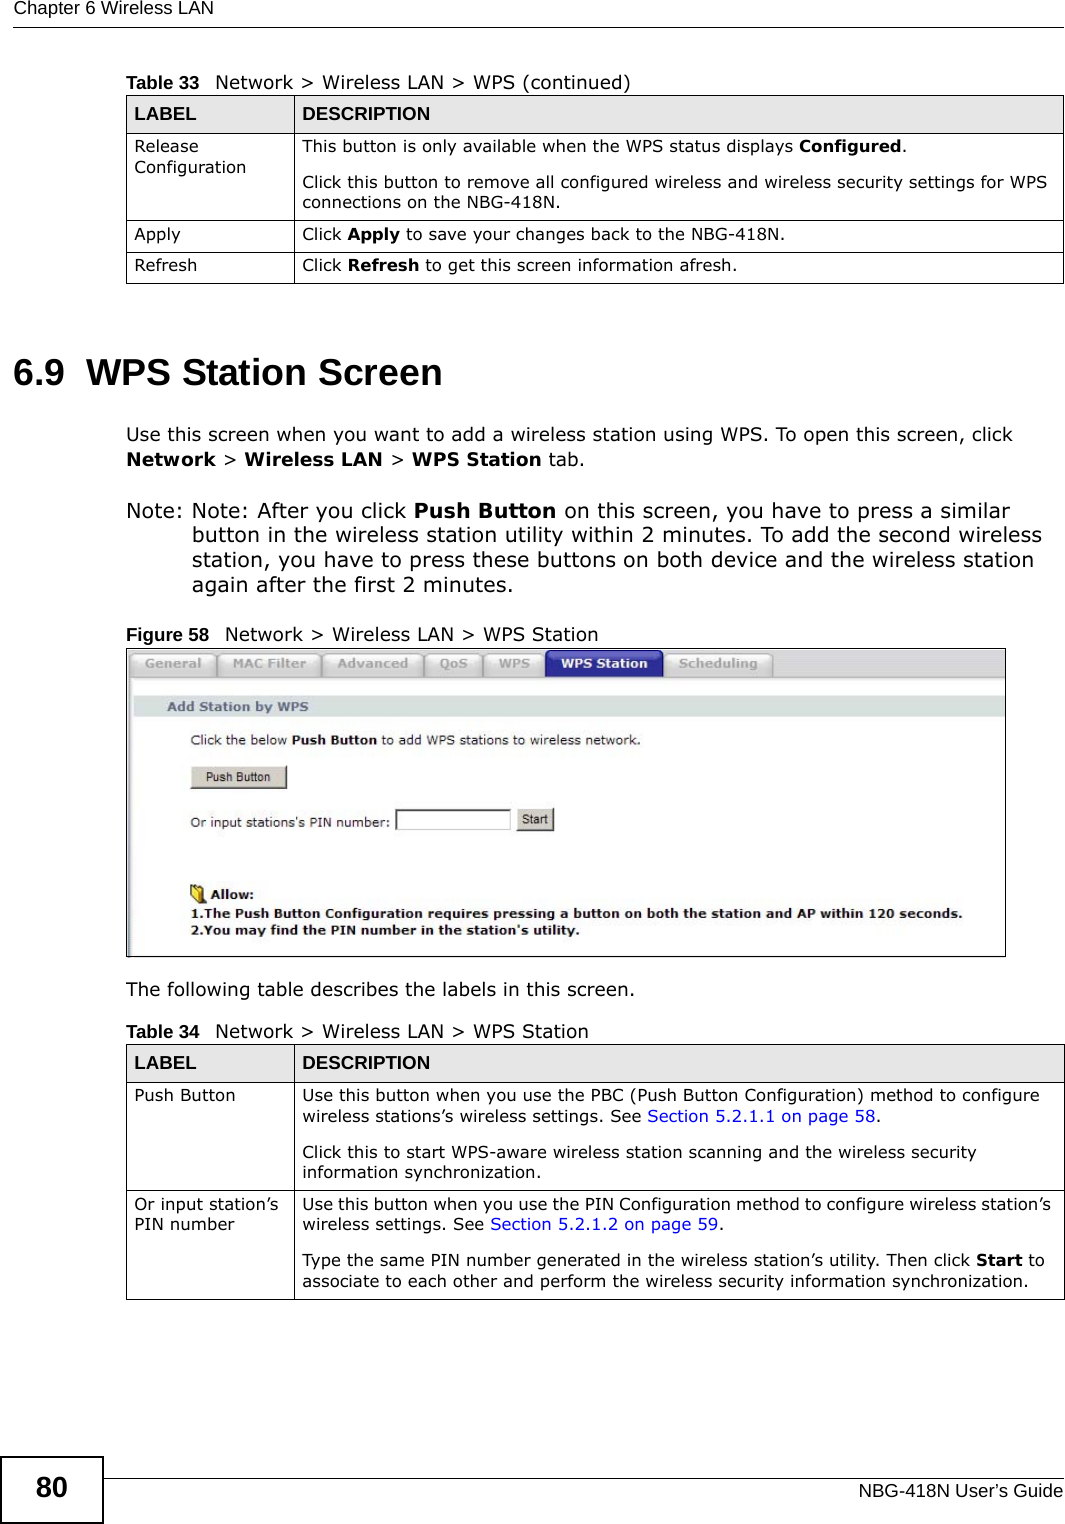 Chapter 6 Wireless LANNBG-418N User’s Guide806.9  WPS Station ScreenUse this screen when you want to add a wireless station using WPS. To open this screen, click Network &gt; Wireless LAN &gt; WPS Station tab.Note: Note: After you click Push Button on this screen, you have to press a similar button in the wireless station utility within 2 minutes. To add the second wireless station, you have to press these buttons on both device and the wireless station again after the first 2 minutes.Figure 58   Network &gt; Wireless LAN &gt; WPS StationThe following table describes the labels in this screen.Release ConfigurationThis button is only available when the WPS status displays Configured.Click this button to remove all configured wireless and wireless security settings for WPS connections on the NBG-418N.Apply Click Apply to save your changes back to the NBG-418N.Refresh Click Refresh to get this screen information afresh.Table 33   Network &gt; Wireless LAN &gt; WPS (continued)LABEL DESCRIPTIONTable 34   Network &gt; Wireless LAN &gt; WPS StationLABEL DESCRIPTIONPush Button Use this button when you use the PBC (Push Button Configuration) method to configure wireless stations’s wireless settings. See Section 5.2.1.1 on page 58.Click this to start WPS-aware wireless station scanning and the wireless security information synchronization. Or input station’s PIN numberUse this button when you use the PIN Configuration method to configure wireless station’s wireless settings. See Section 5.2.1.2 on page 59.Type the same PIN number generated in the wireless station’s utility. Then click Start to associate to each other and perform the wireless security information synchronization. 